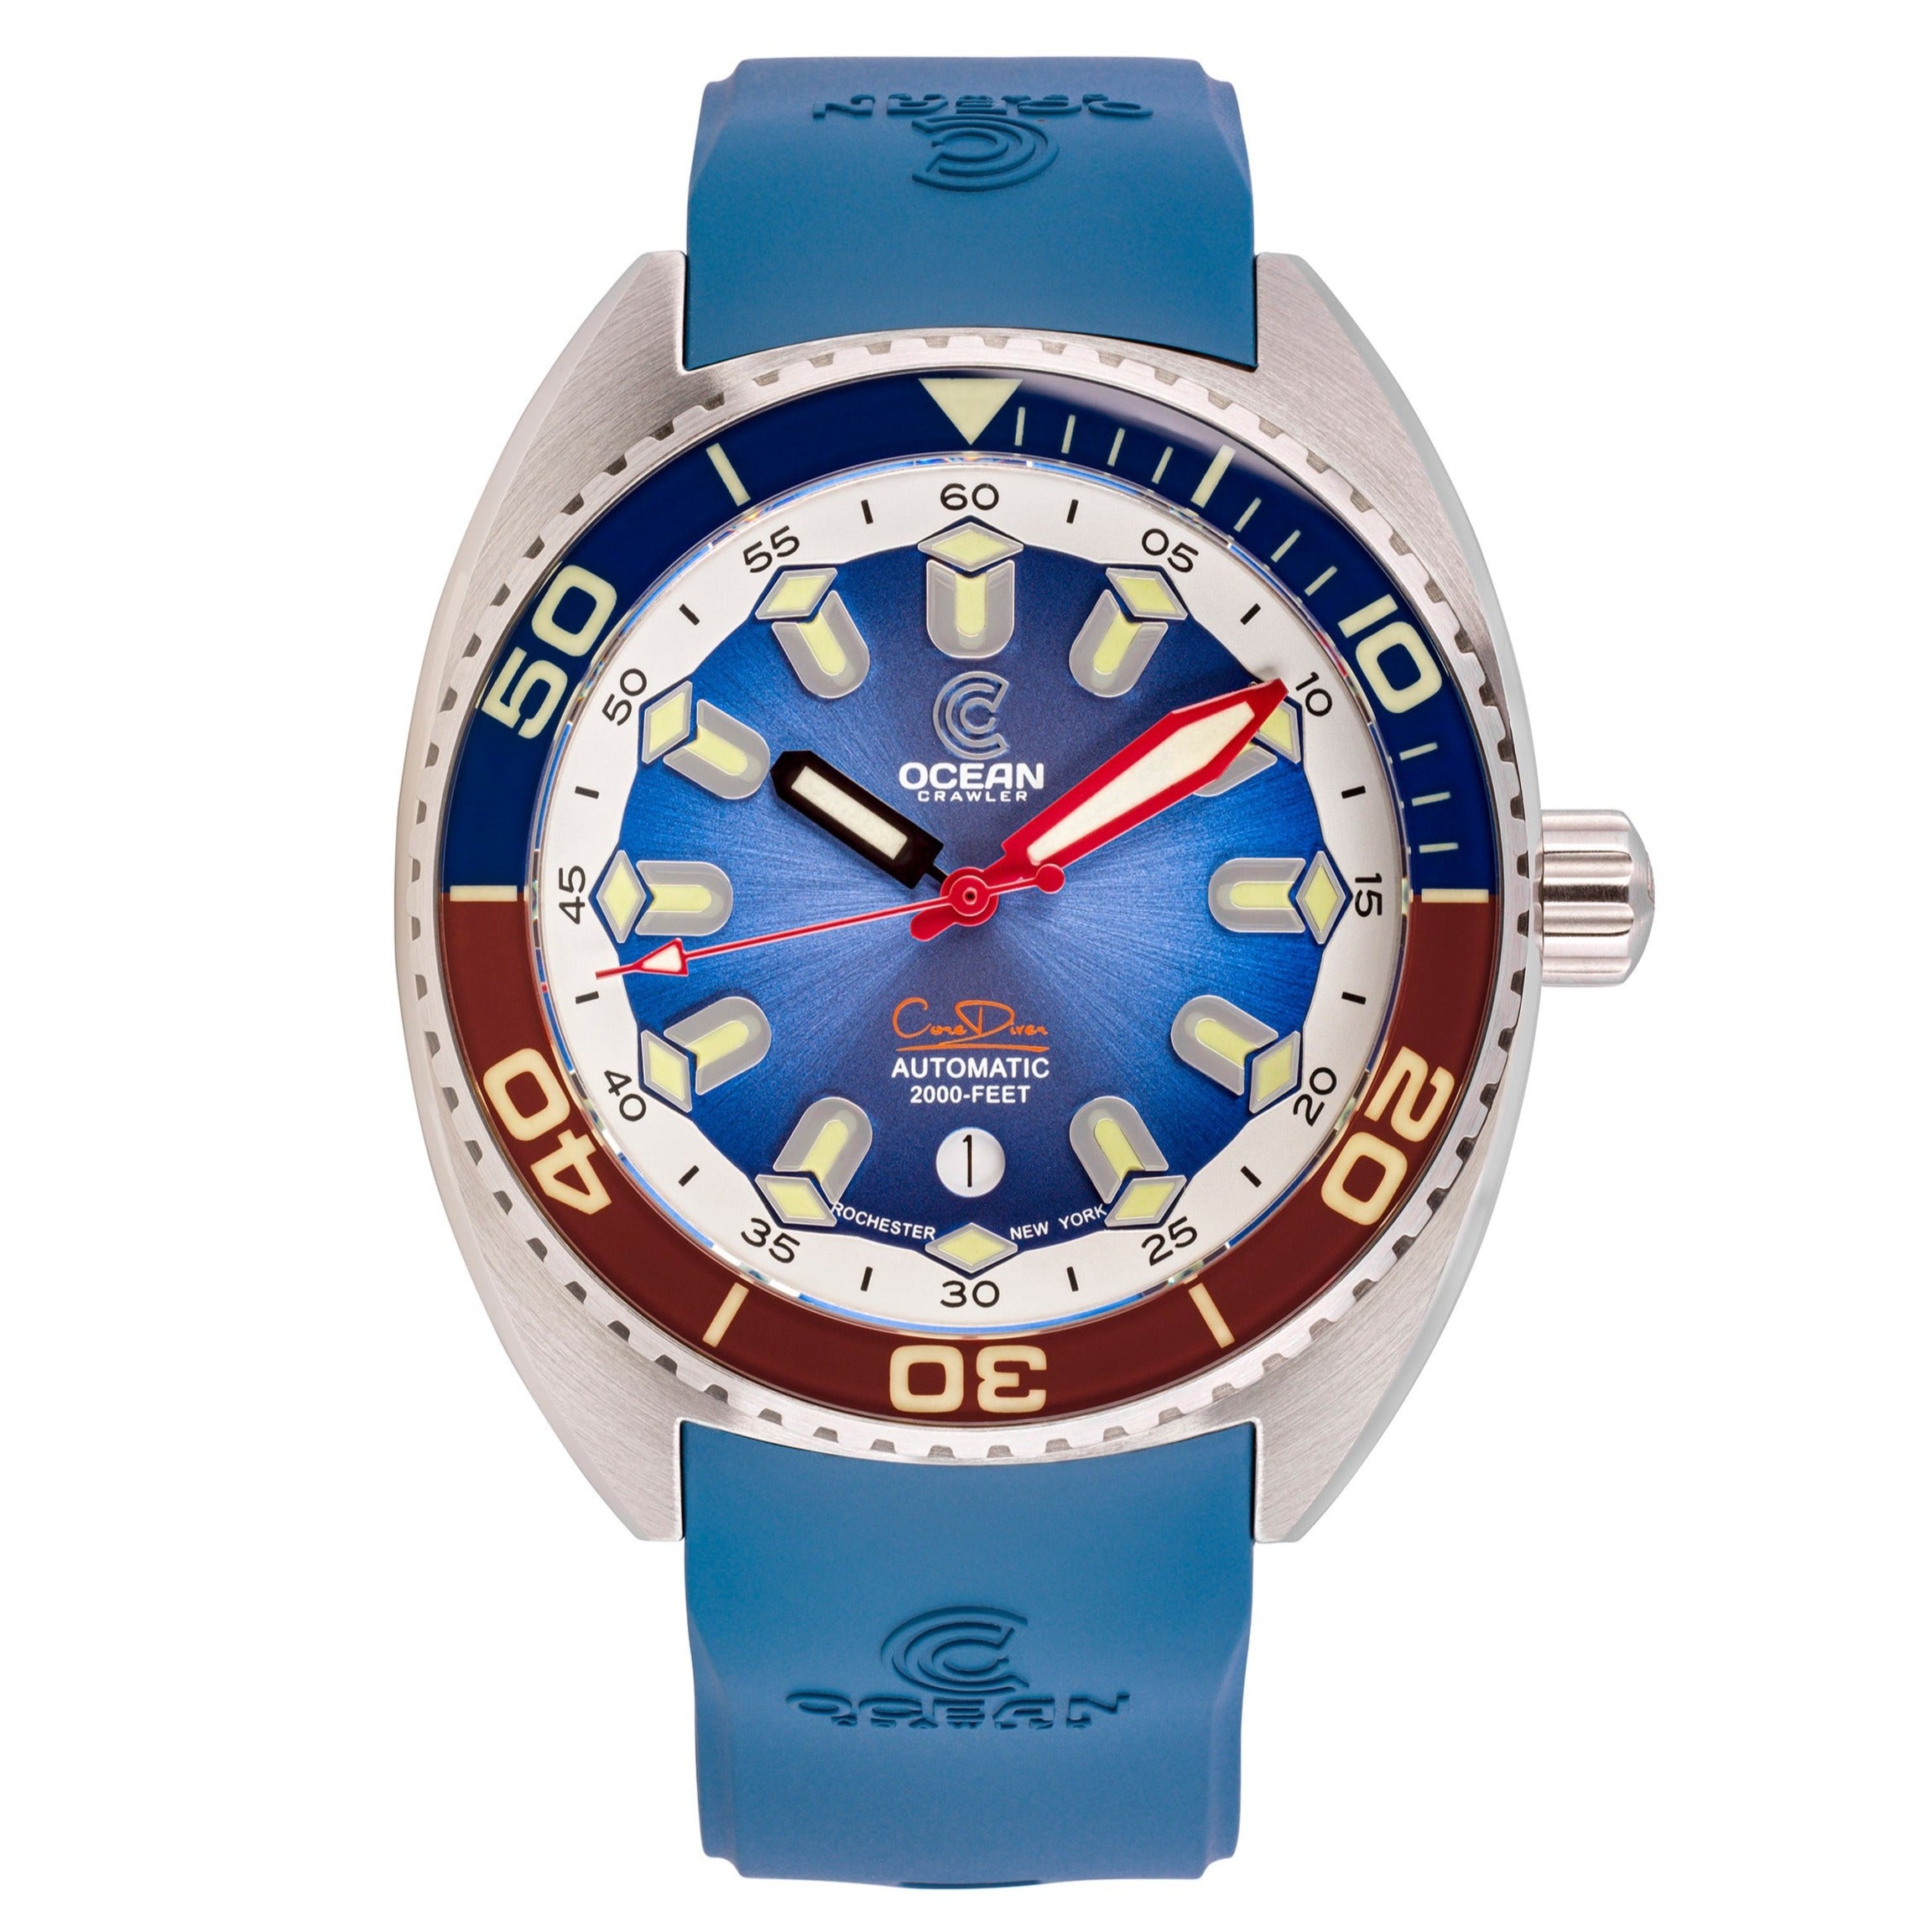 Ocean Crawler Core Diver - Blue/Red - Only 1 left